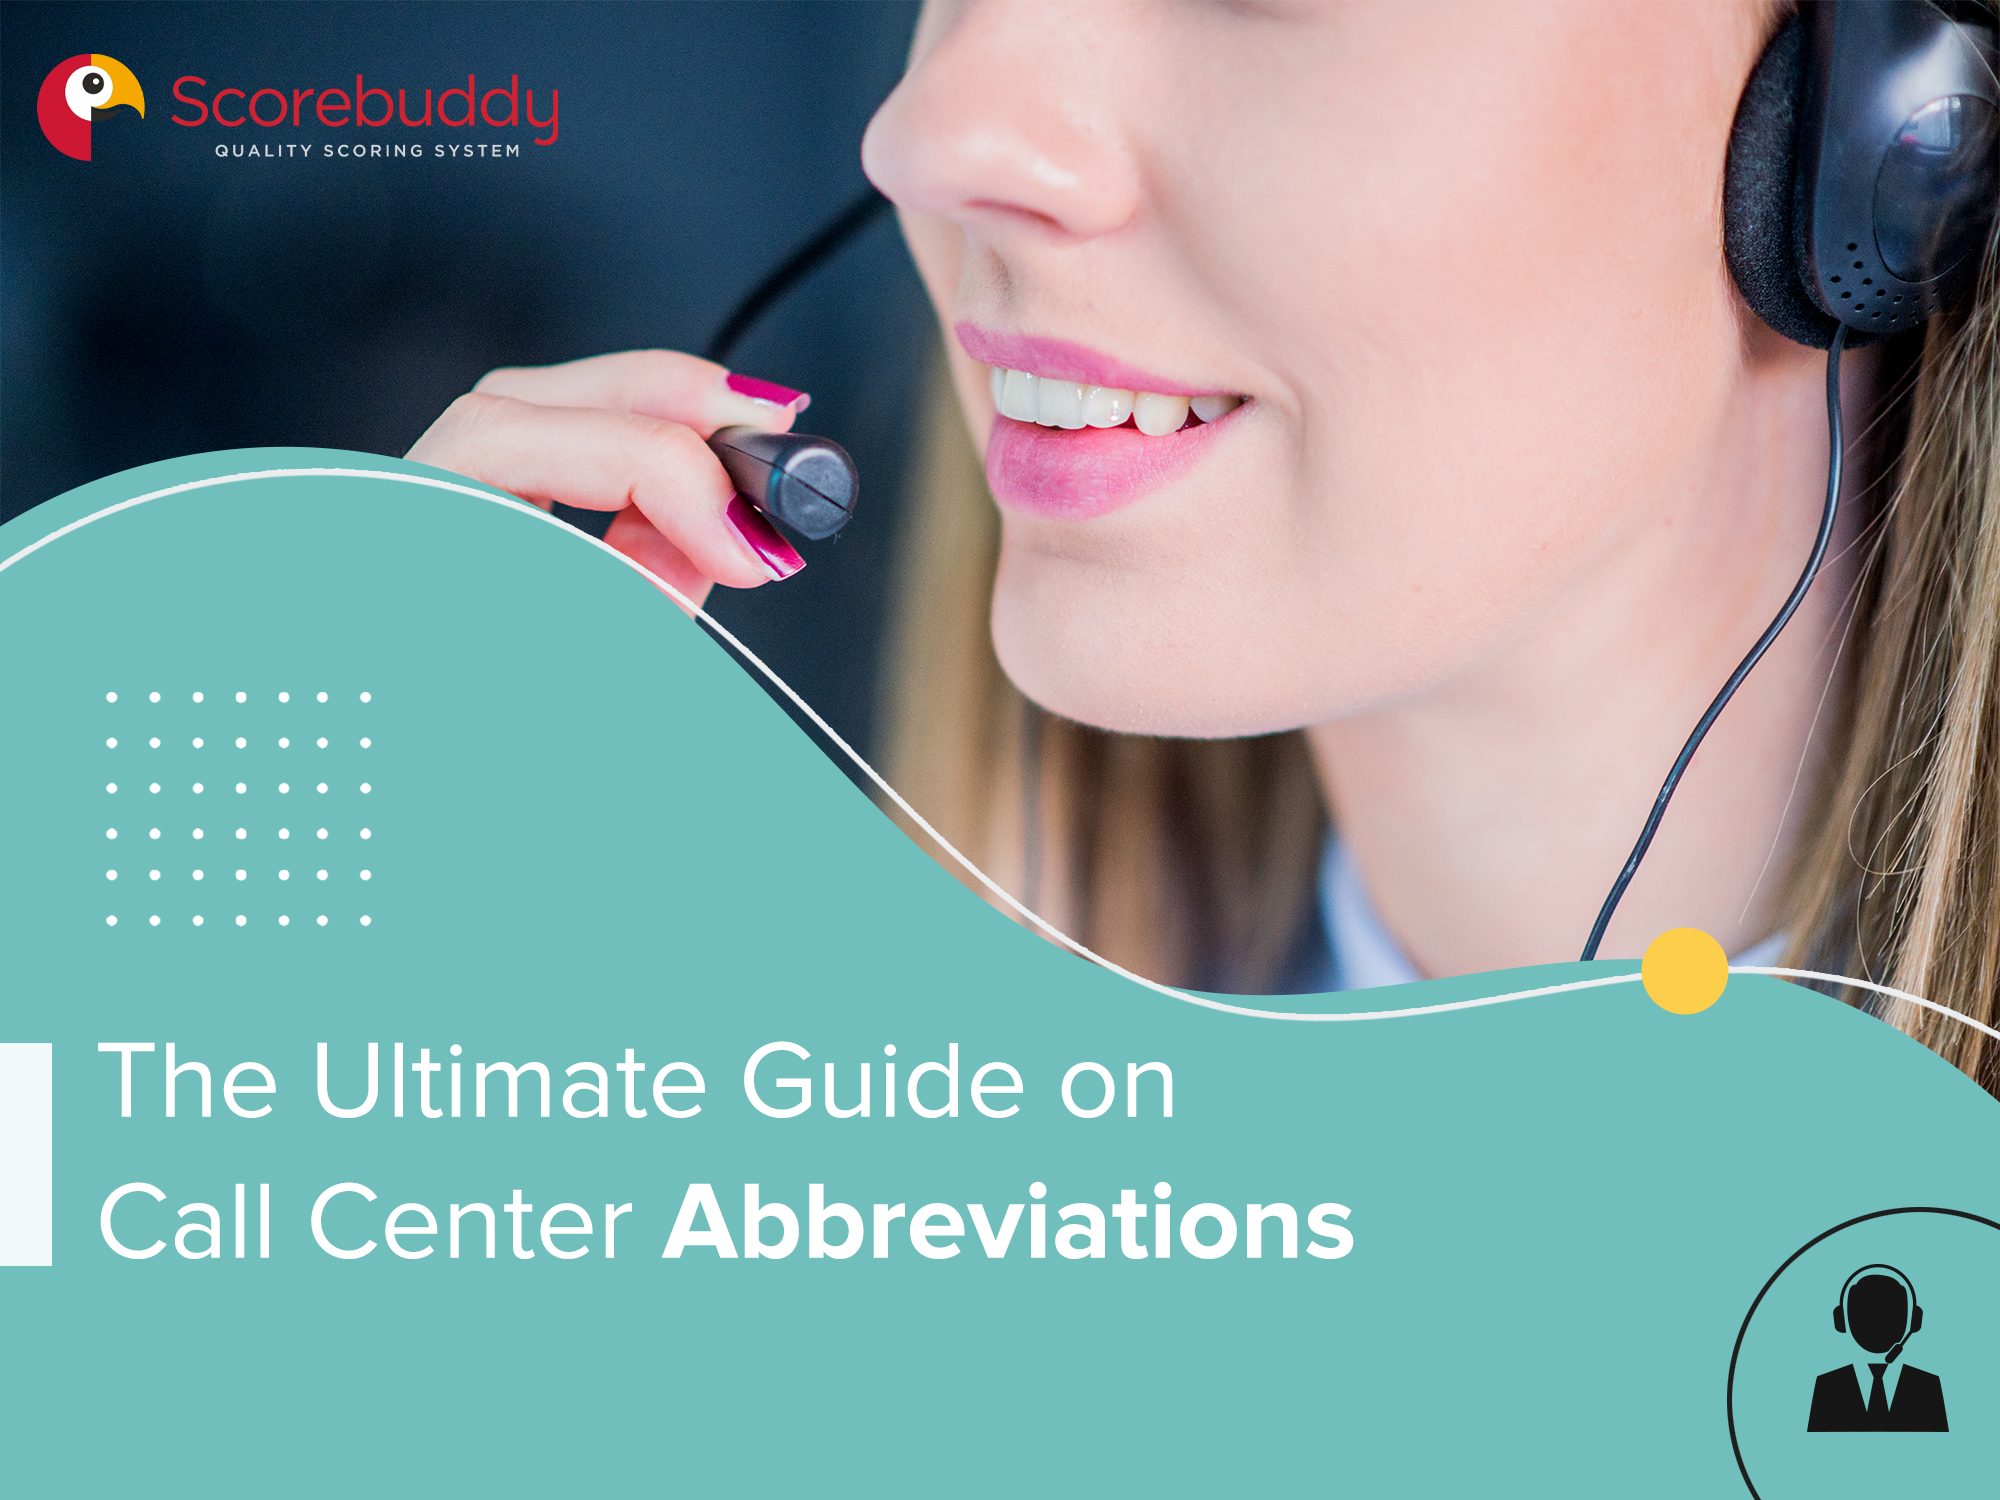 The Ultimate Guide on Call Center Abbreviations